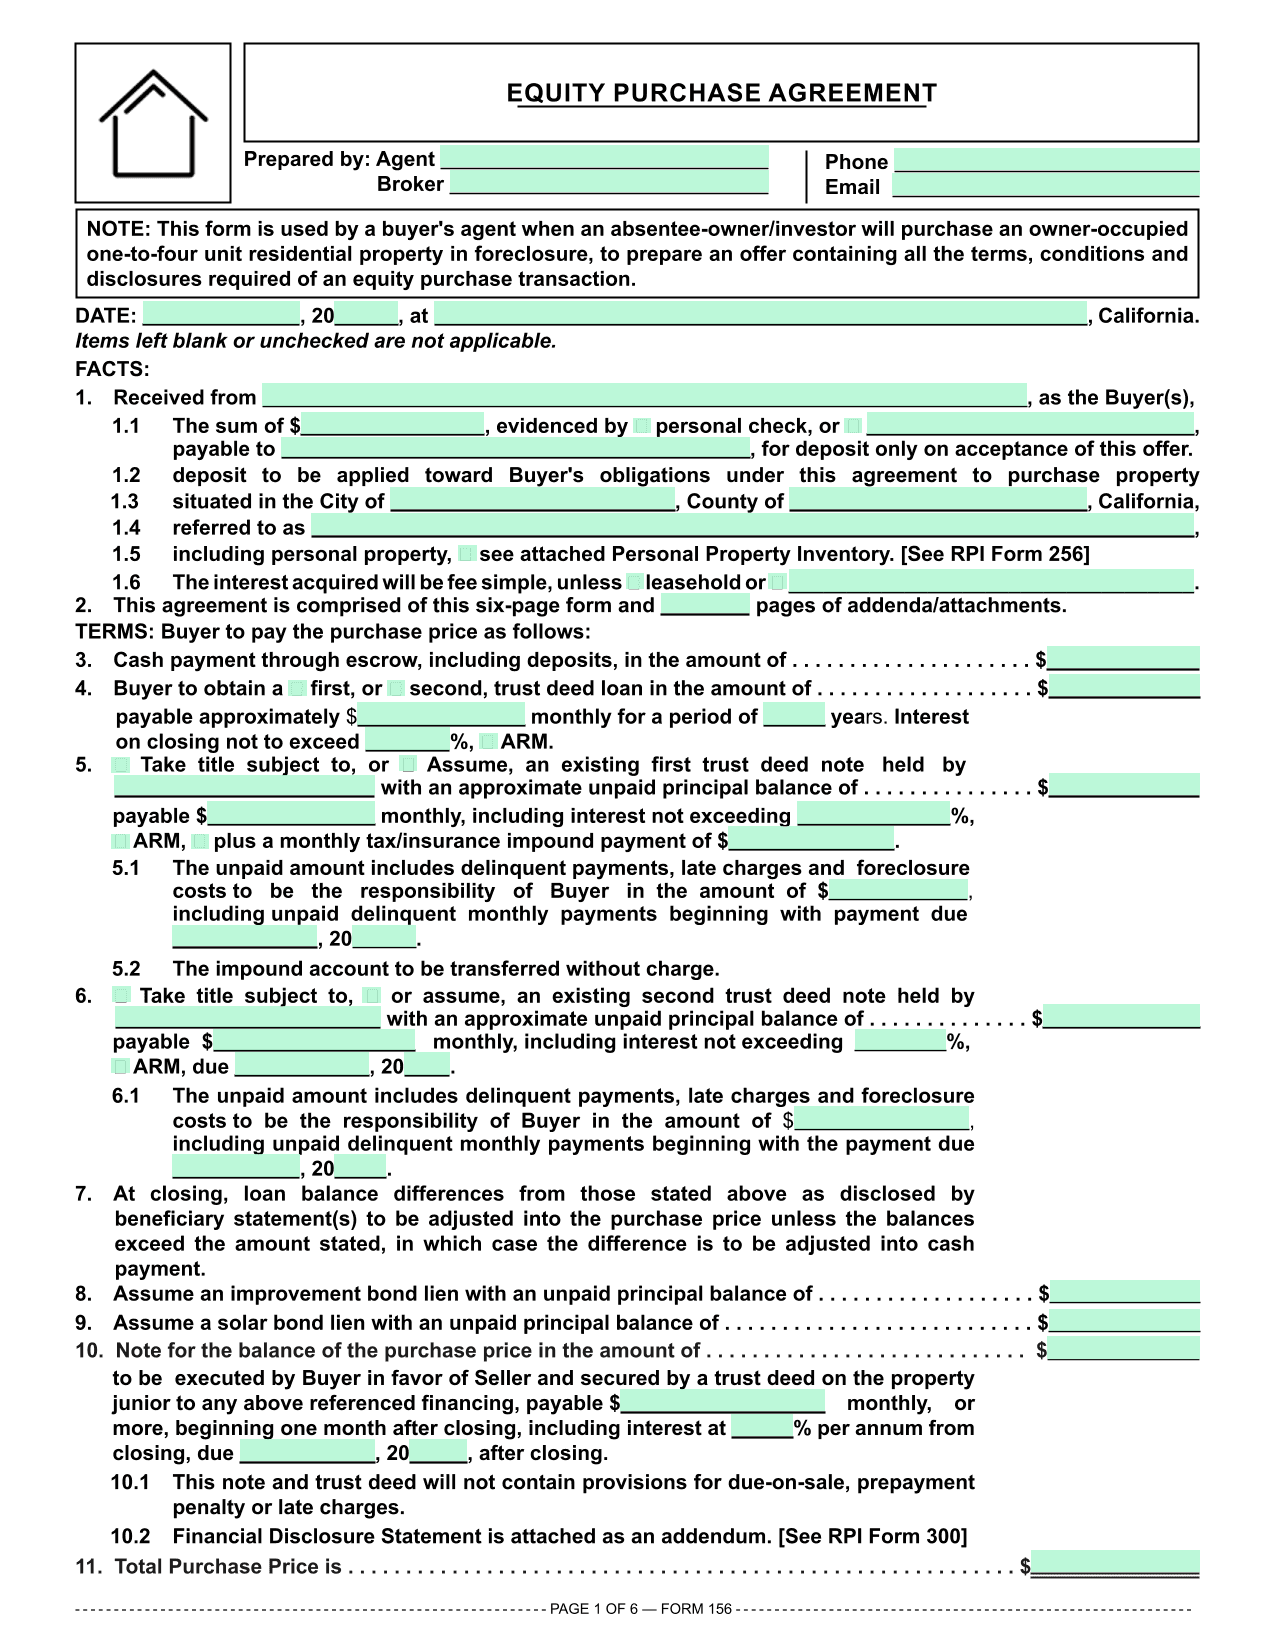 Residential Purchase Agreement (RPI 151) screenshot